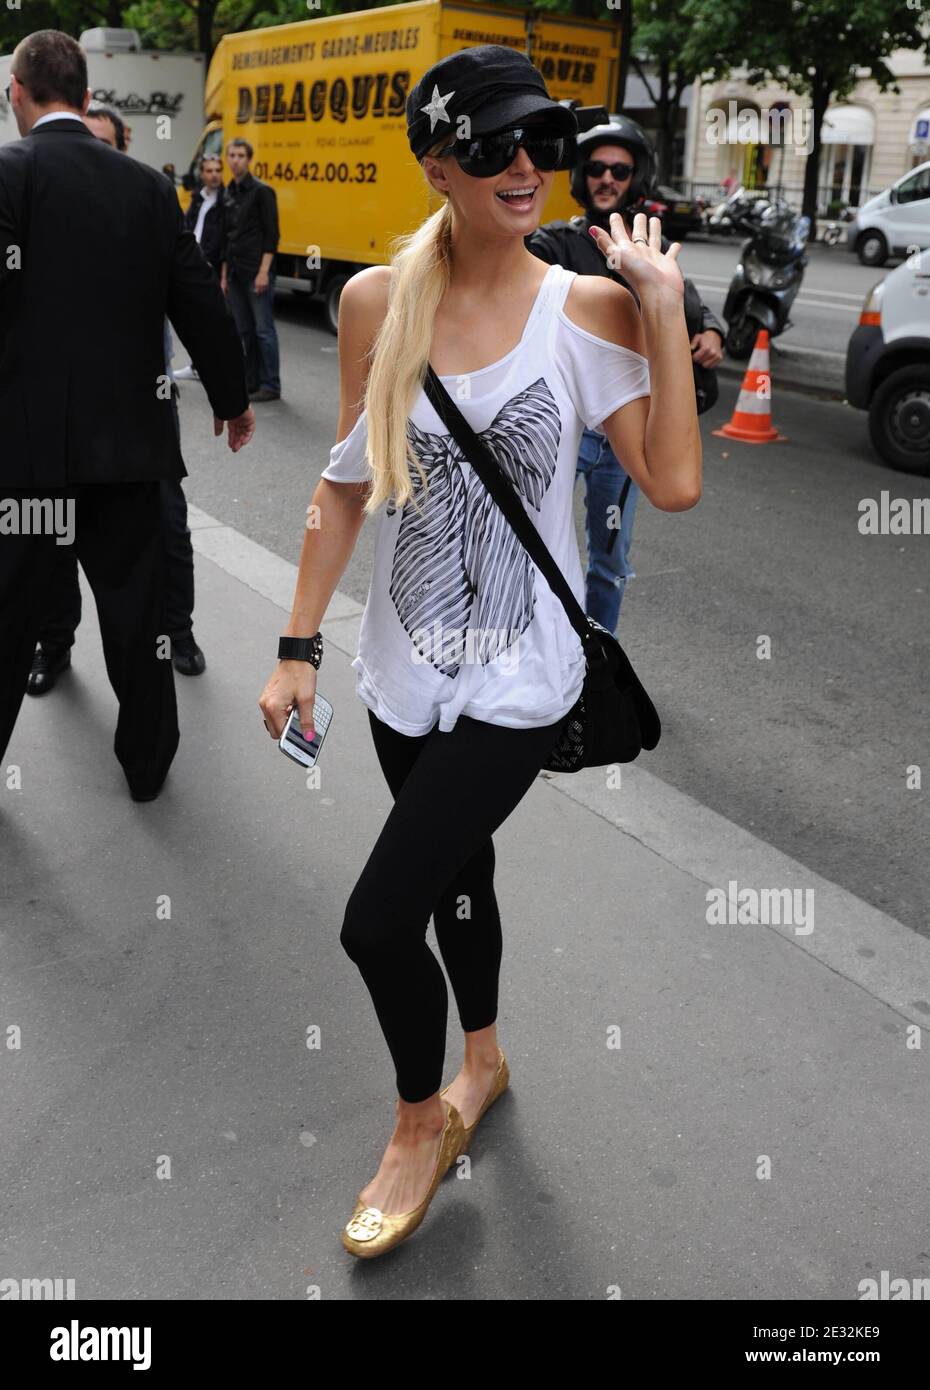 Paris Hilton is seen shopping under heavy security around the Champs Elysees  in Paris, France on July 15, 2010. Accompanied at the beginning of the  afternoon by her sister Nicky Hilton, the